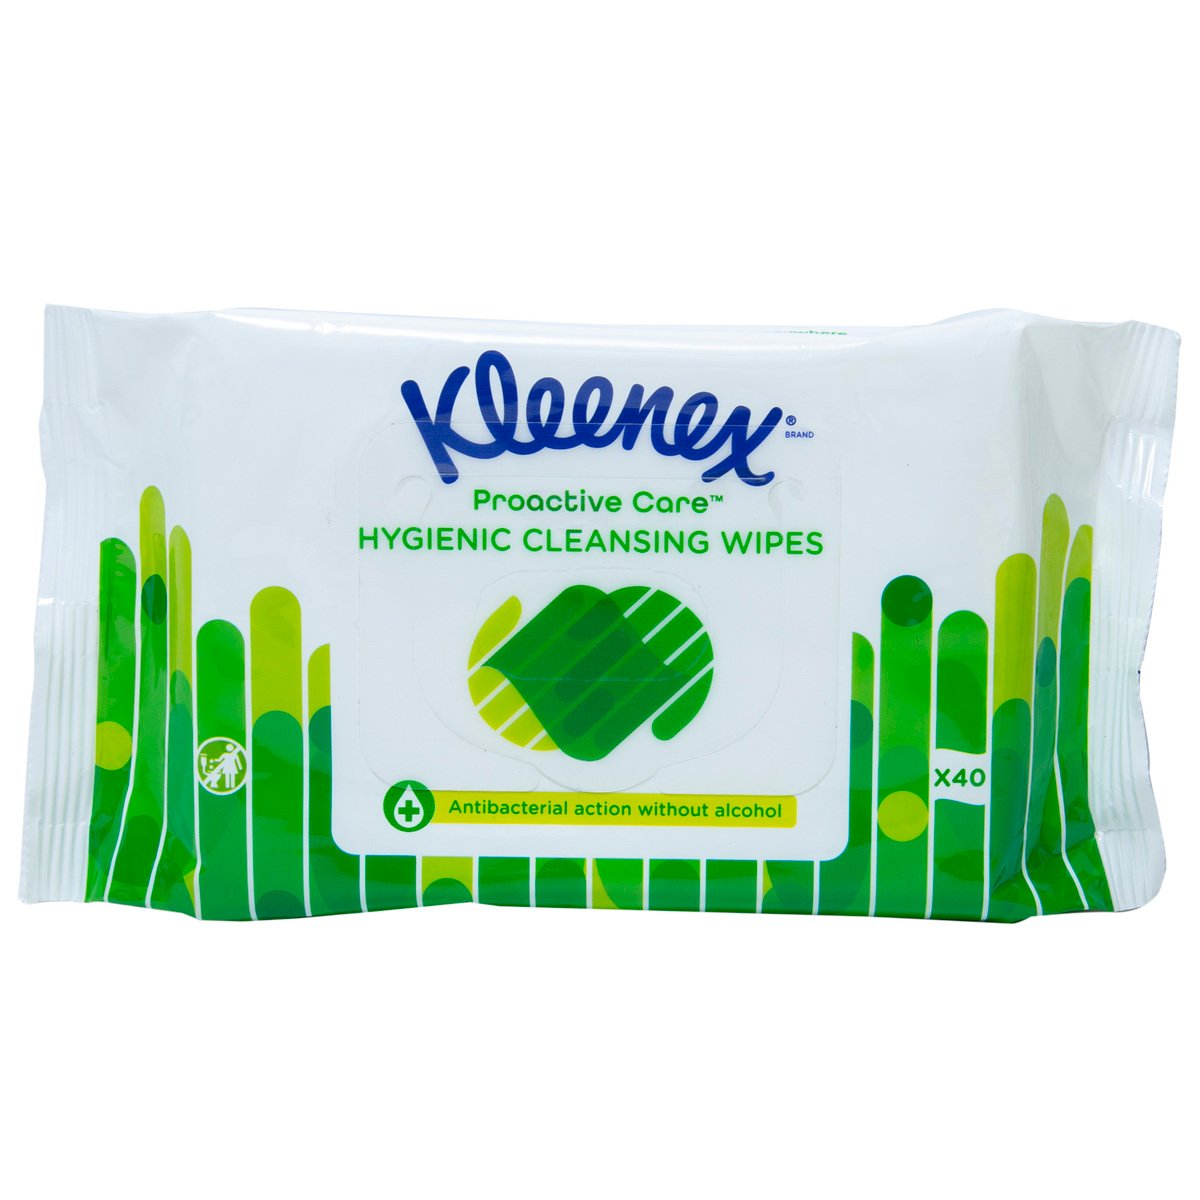 Kleenex Proactive Care Hygienic Cleansing Wipes 40 pcs